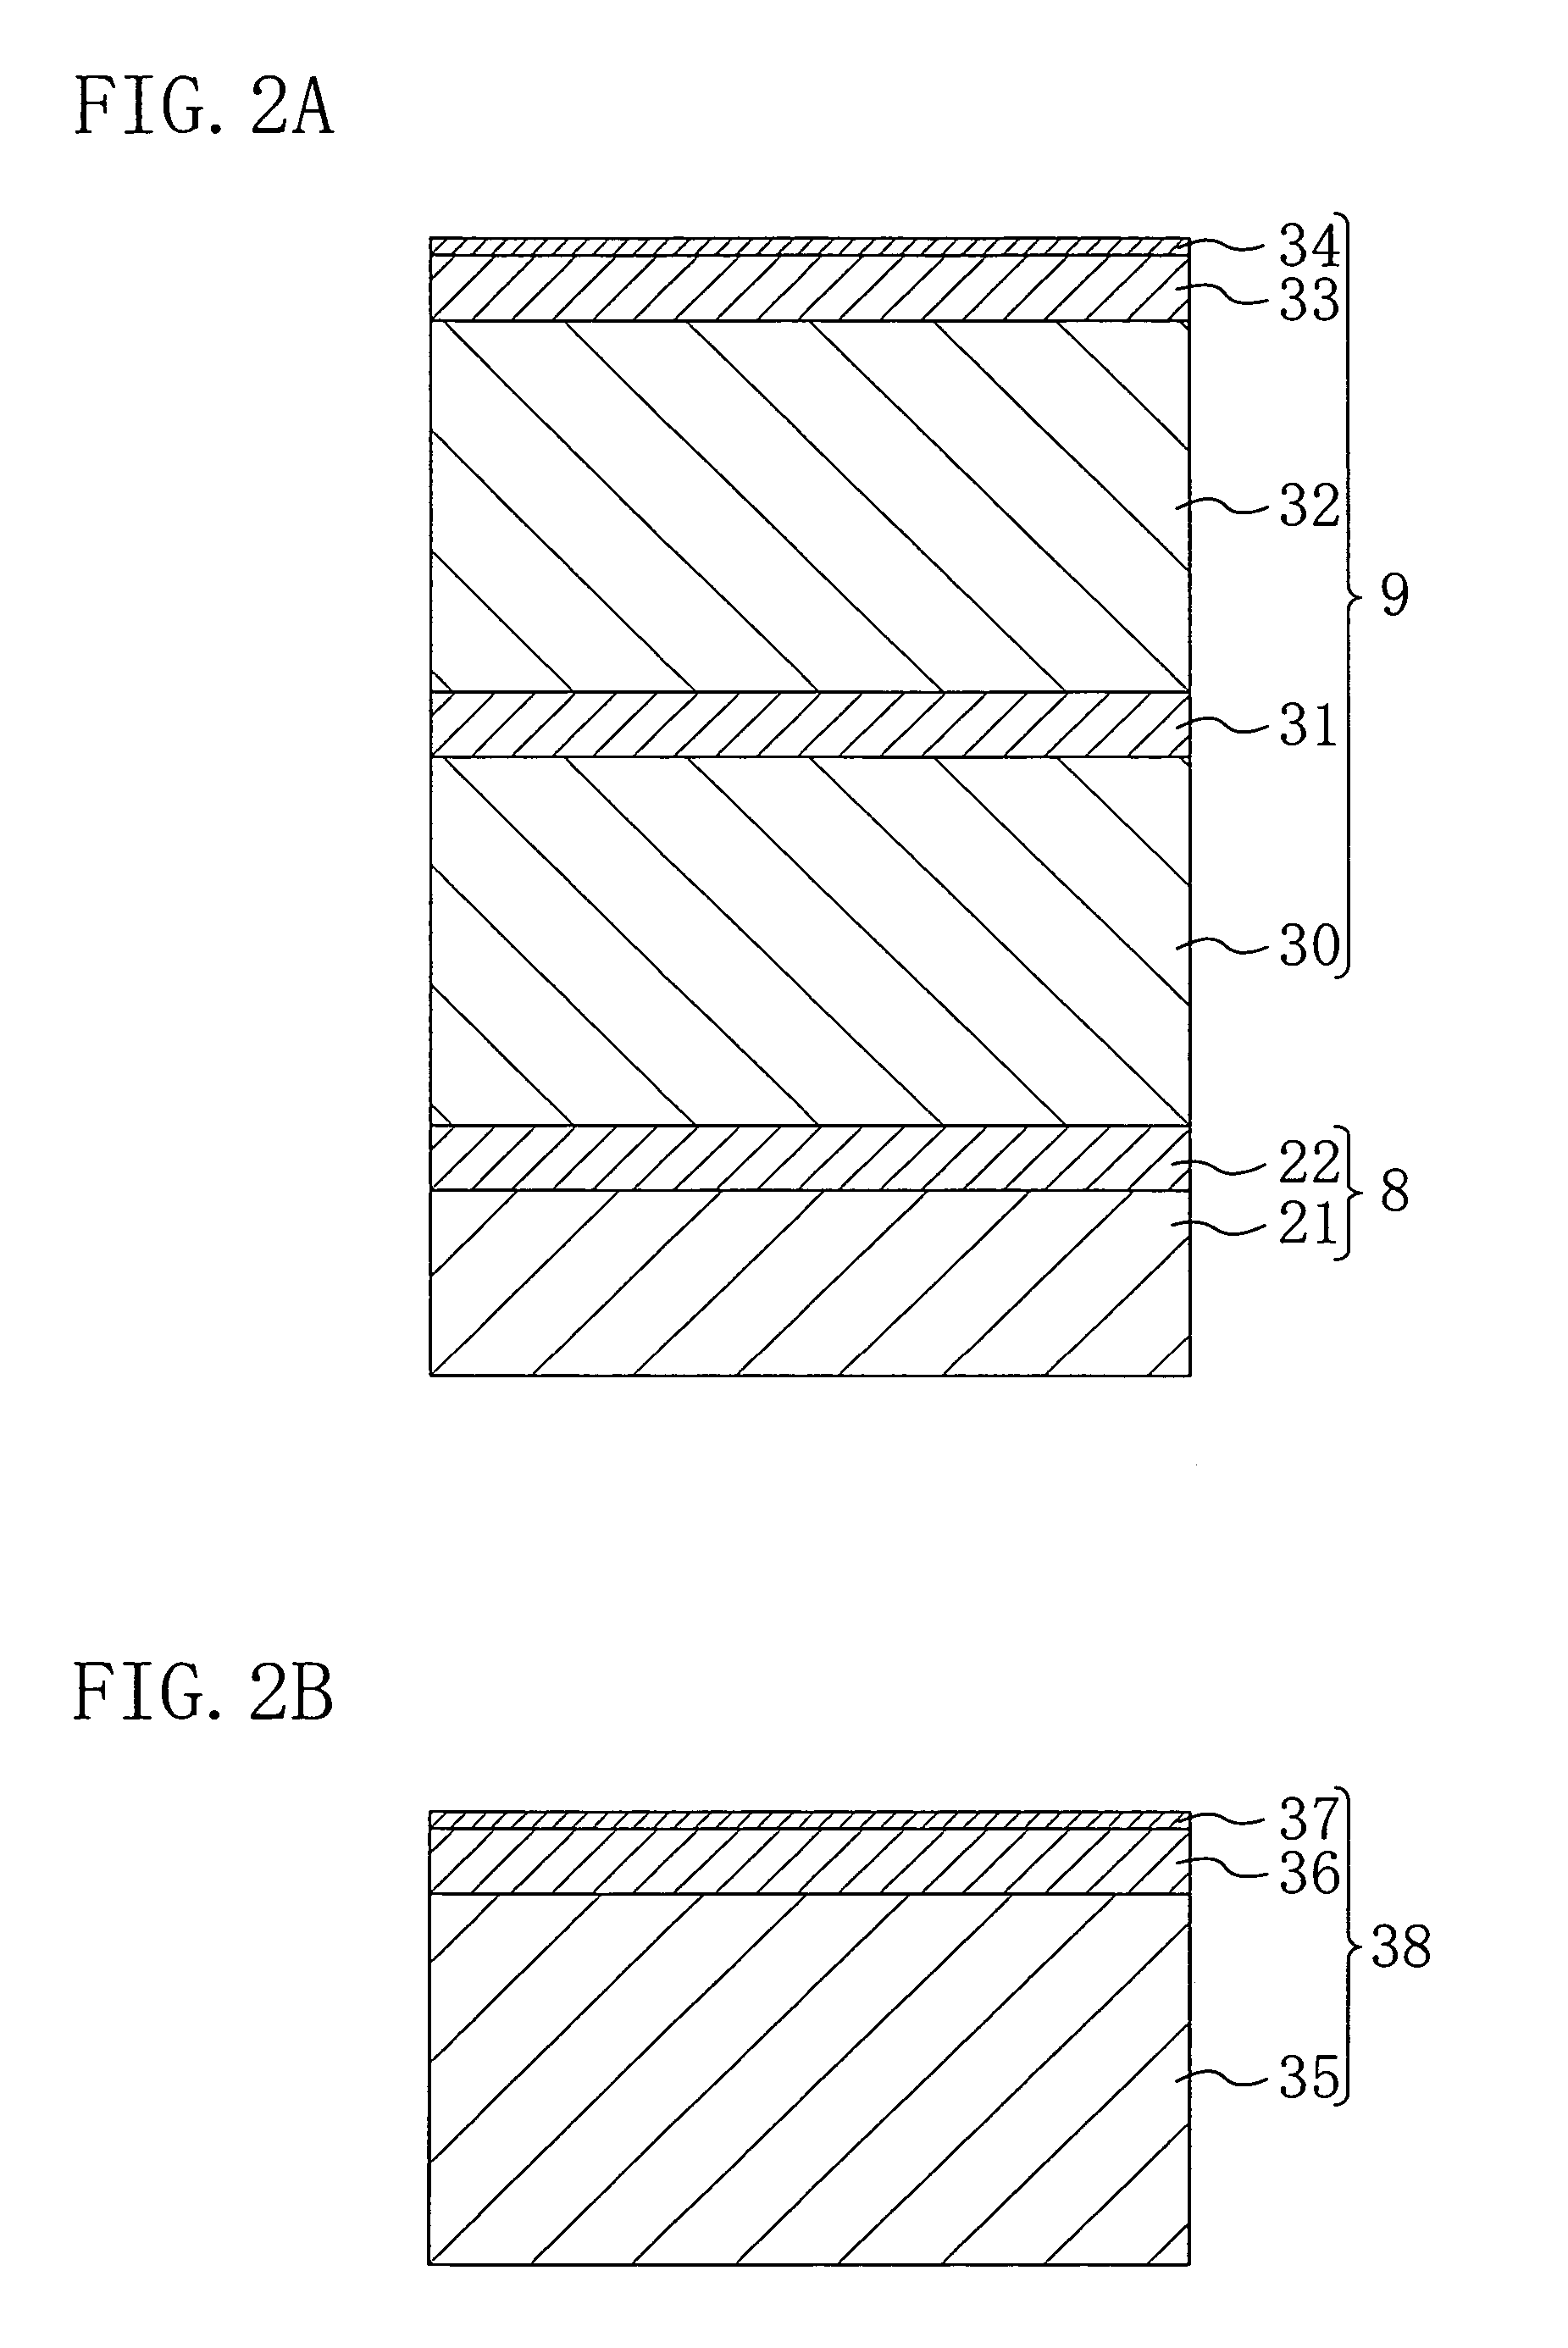 Circuit component mounting device